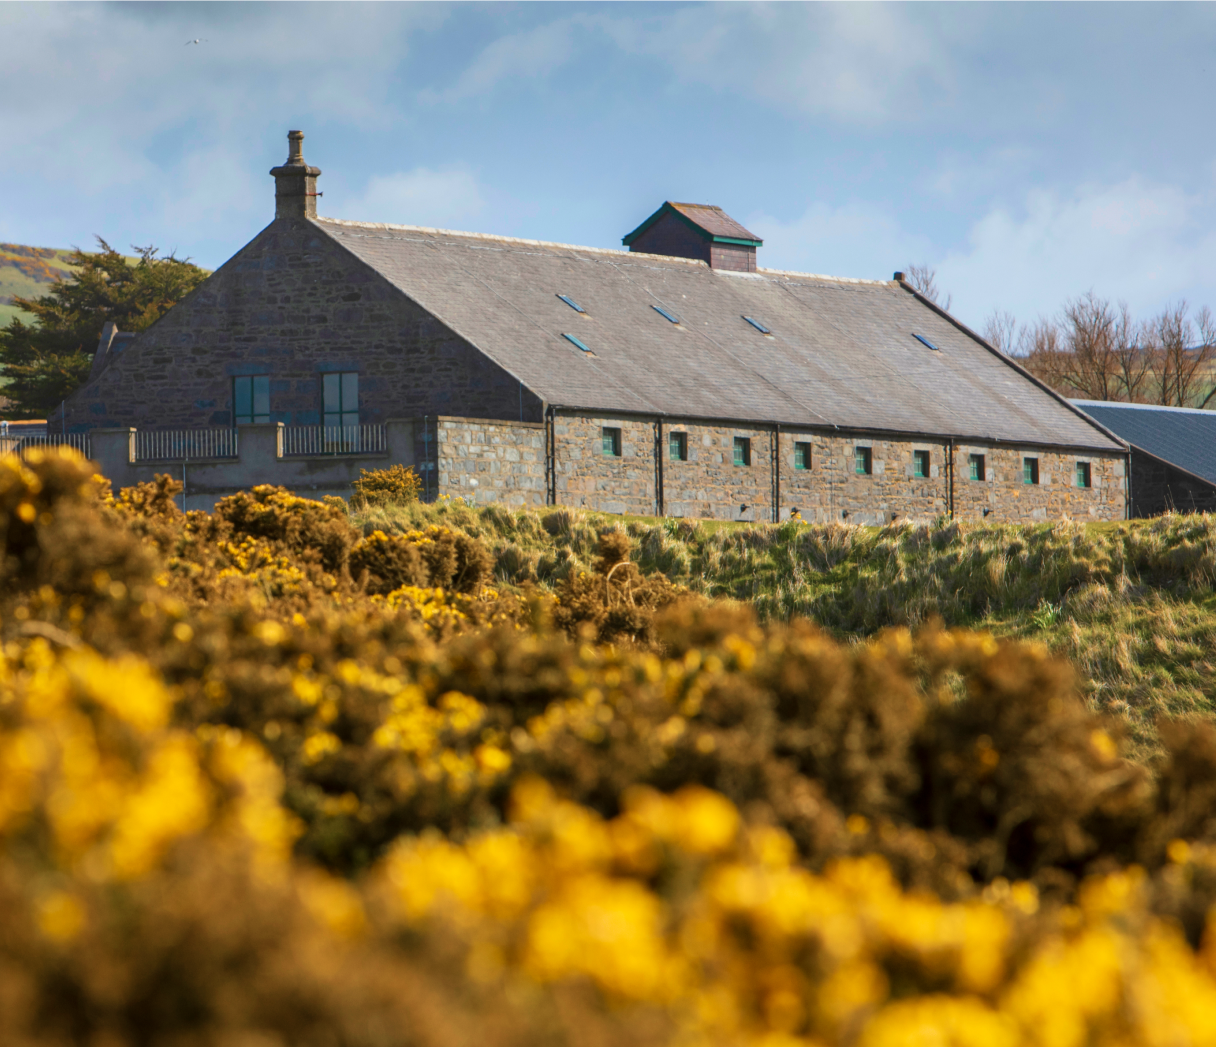 View of an old building with the gorse flowers around it and a blue sky above.